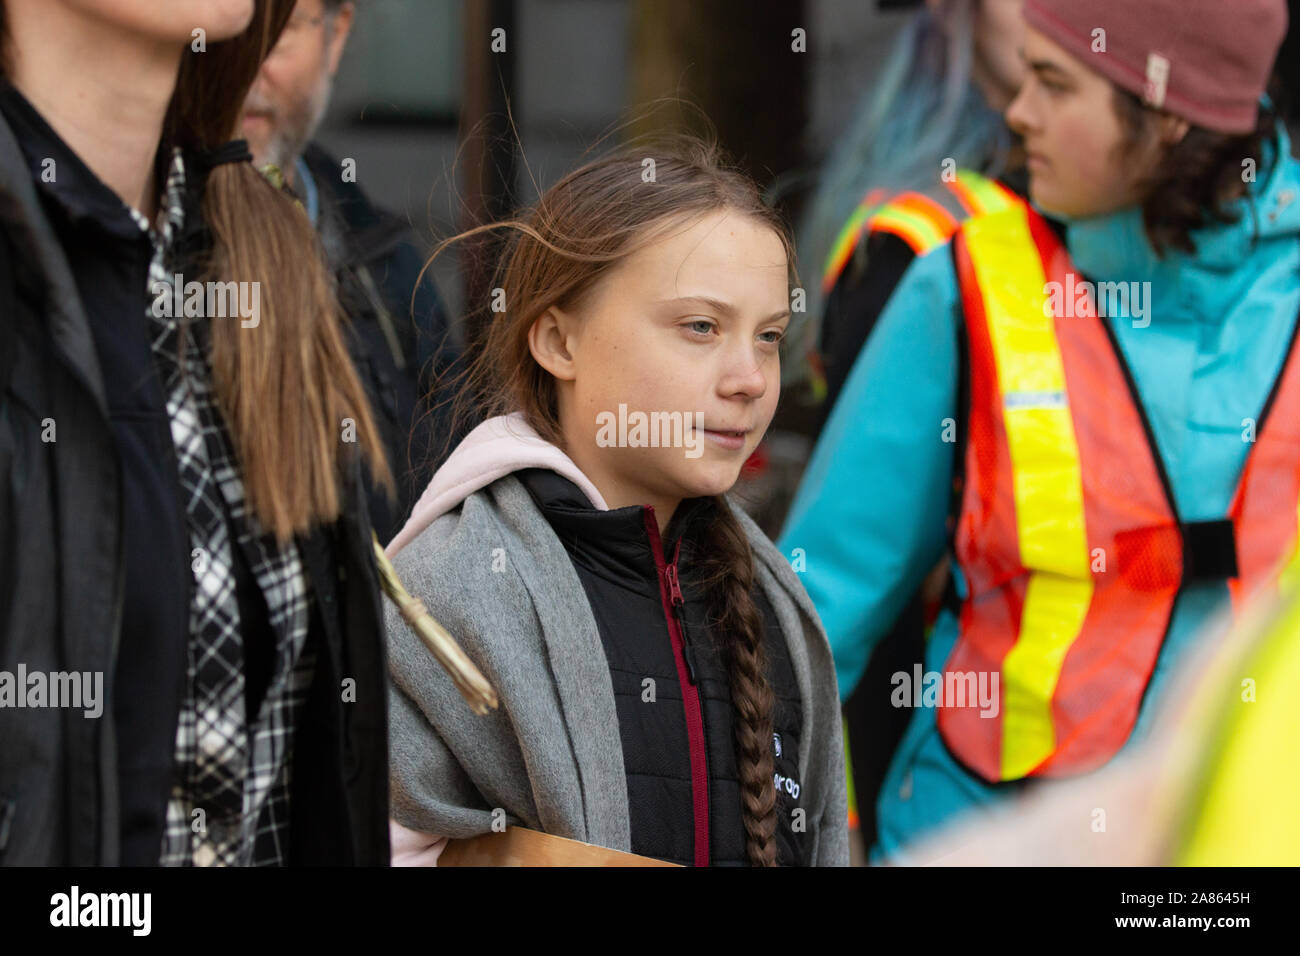 Greta Thunberg in Vancouver, Canada. Swedish Climate Change Activist marching through downtown for the Climate Strike with an estimated 15,000 people. Stock Photo